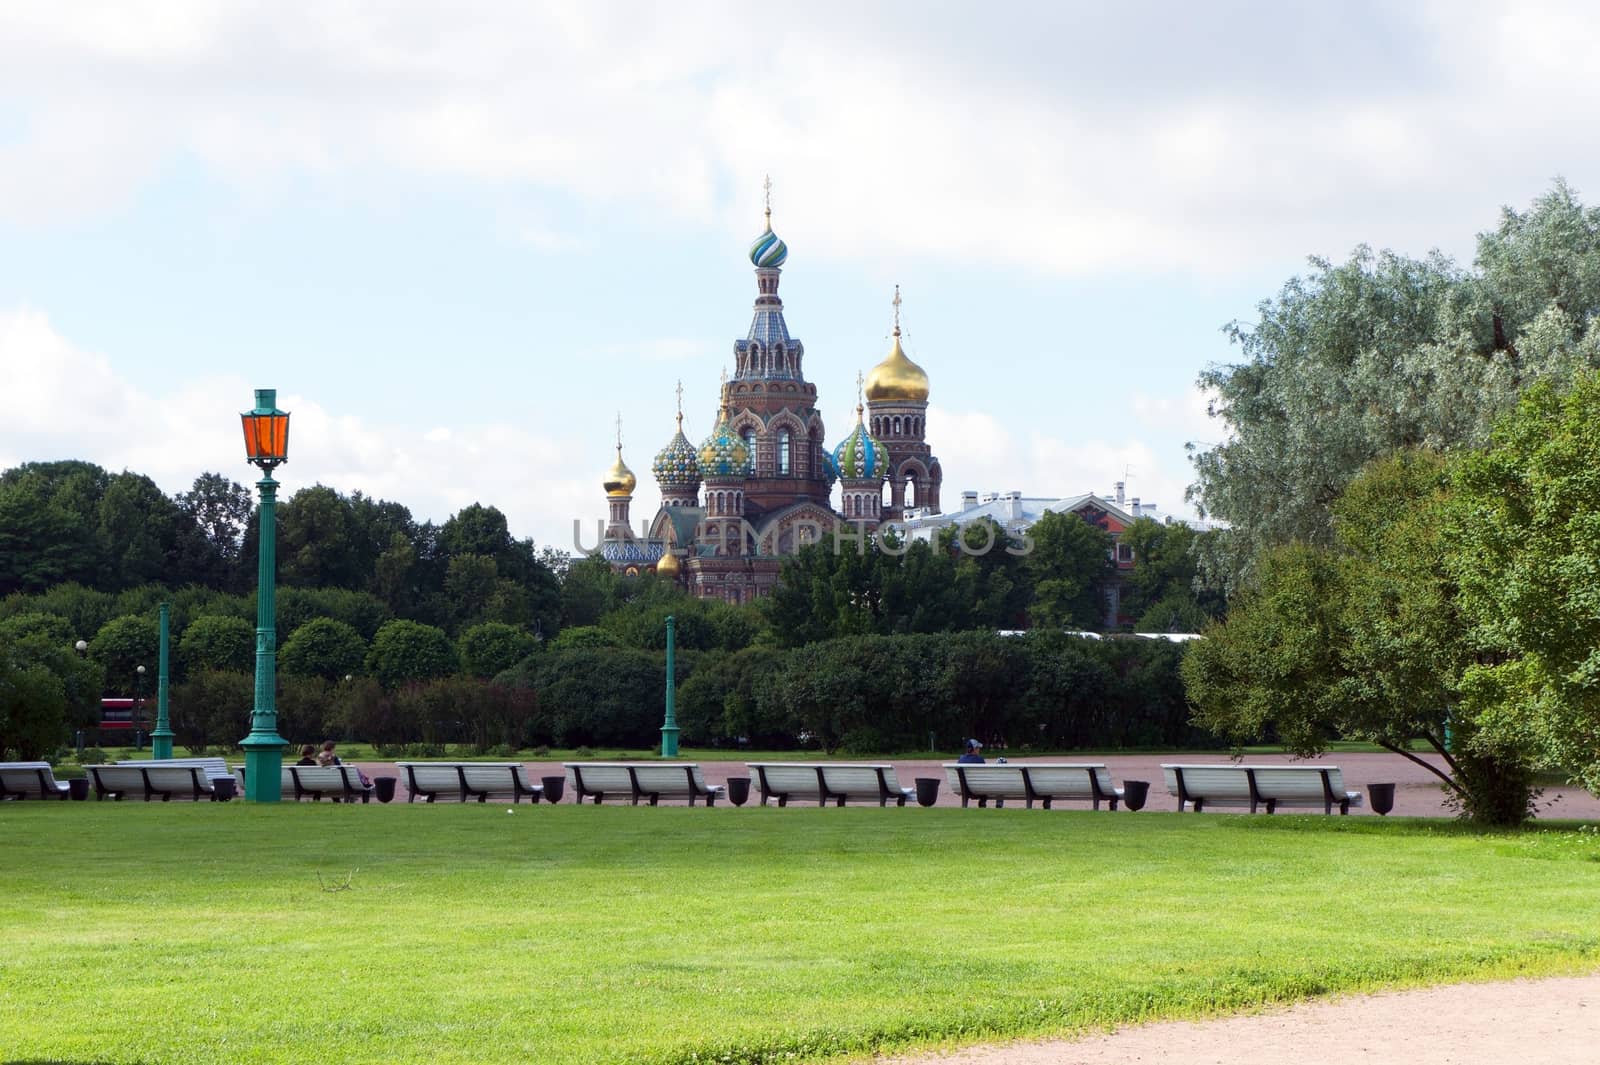 Field of Mars Park and Spilled Blood Cathedral in St. Petersburg by Suchan